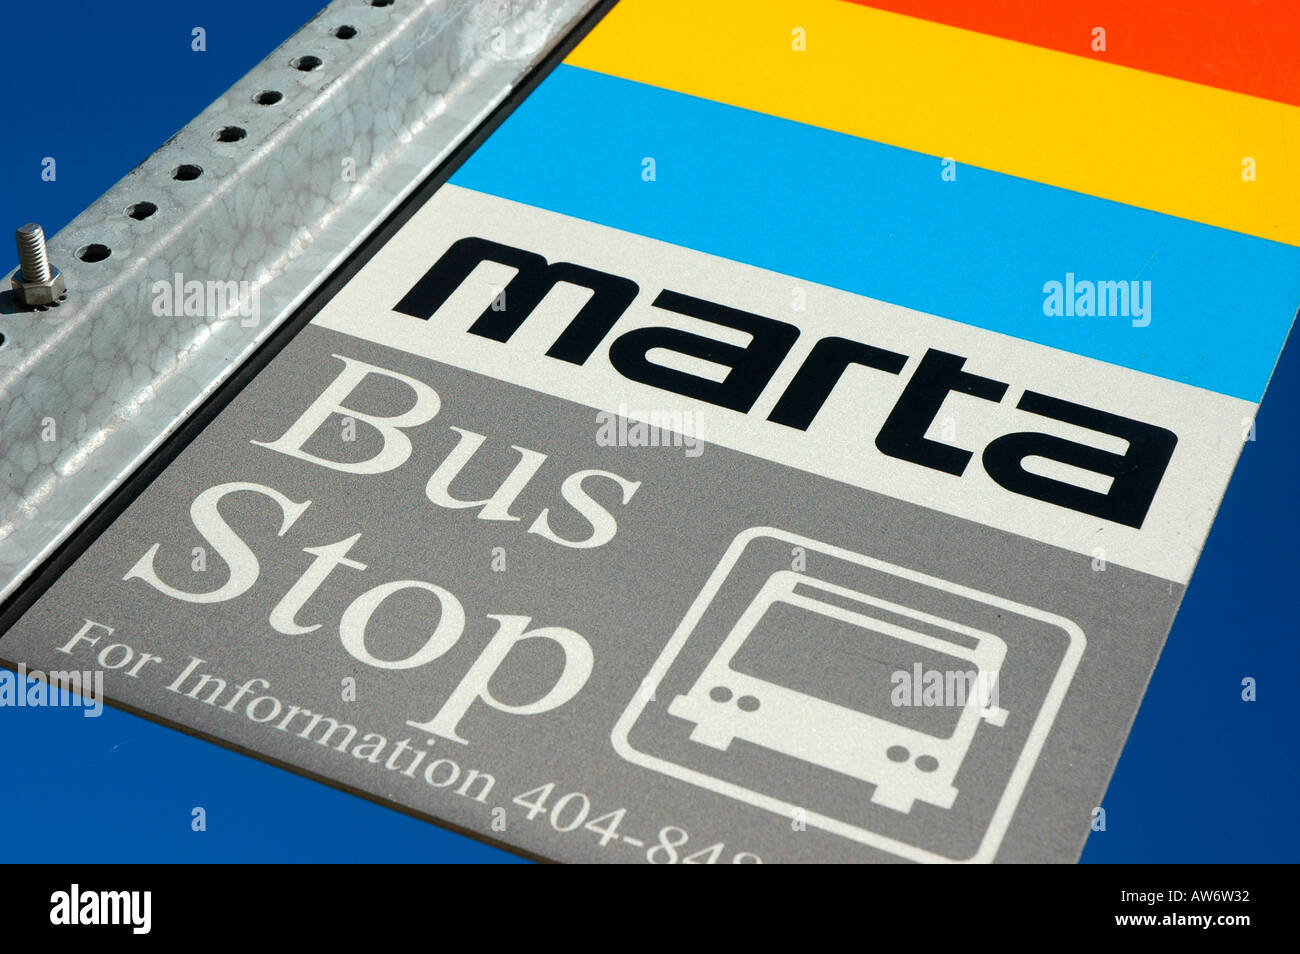 Marta, the public owned Bus System in Atlanta, Sign at a bus stop for passengers to get around Georgia, Metropolitan Atlanta Rapid Transit Authority Stock Photo